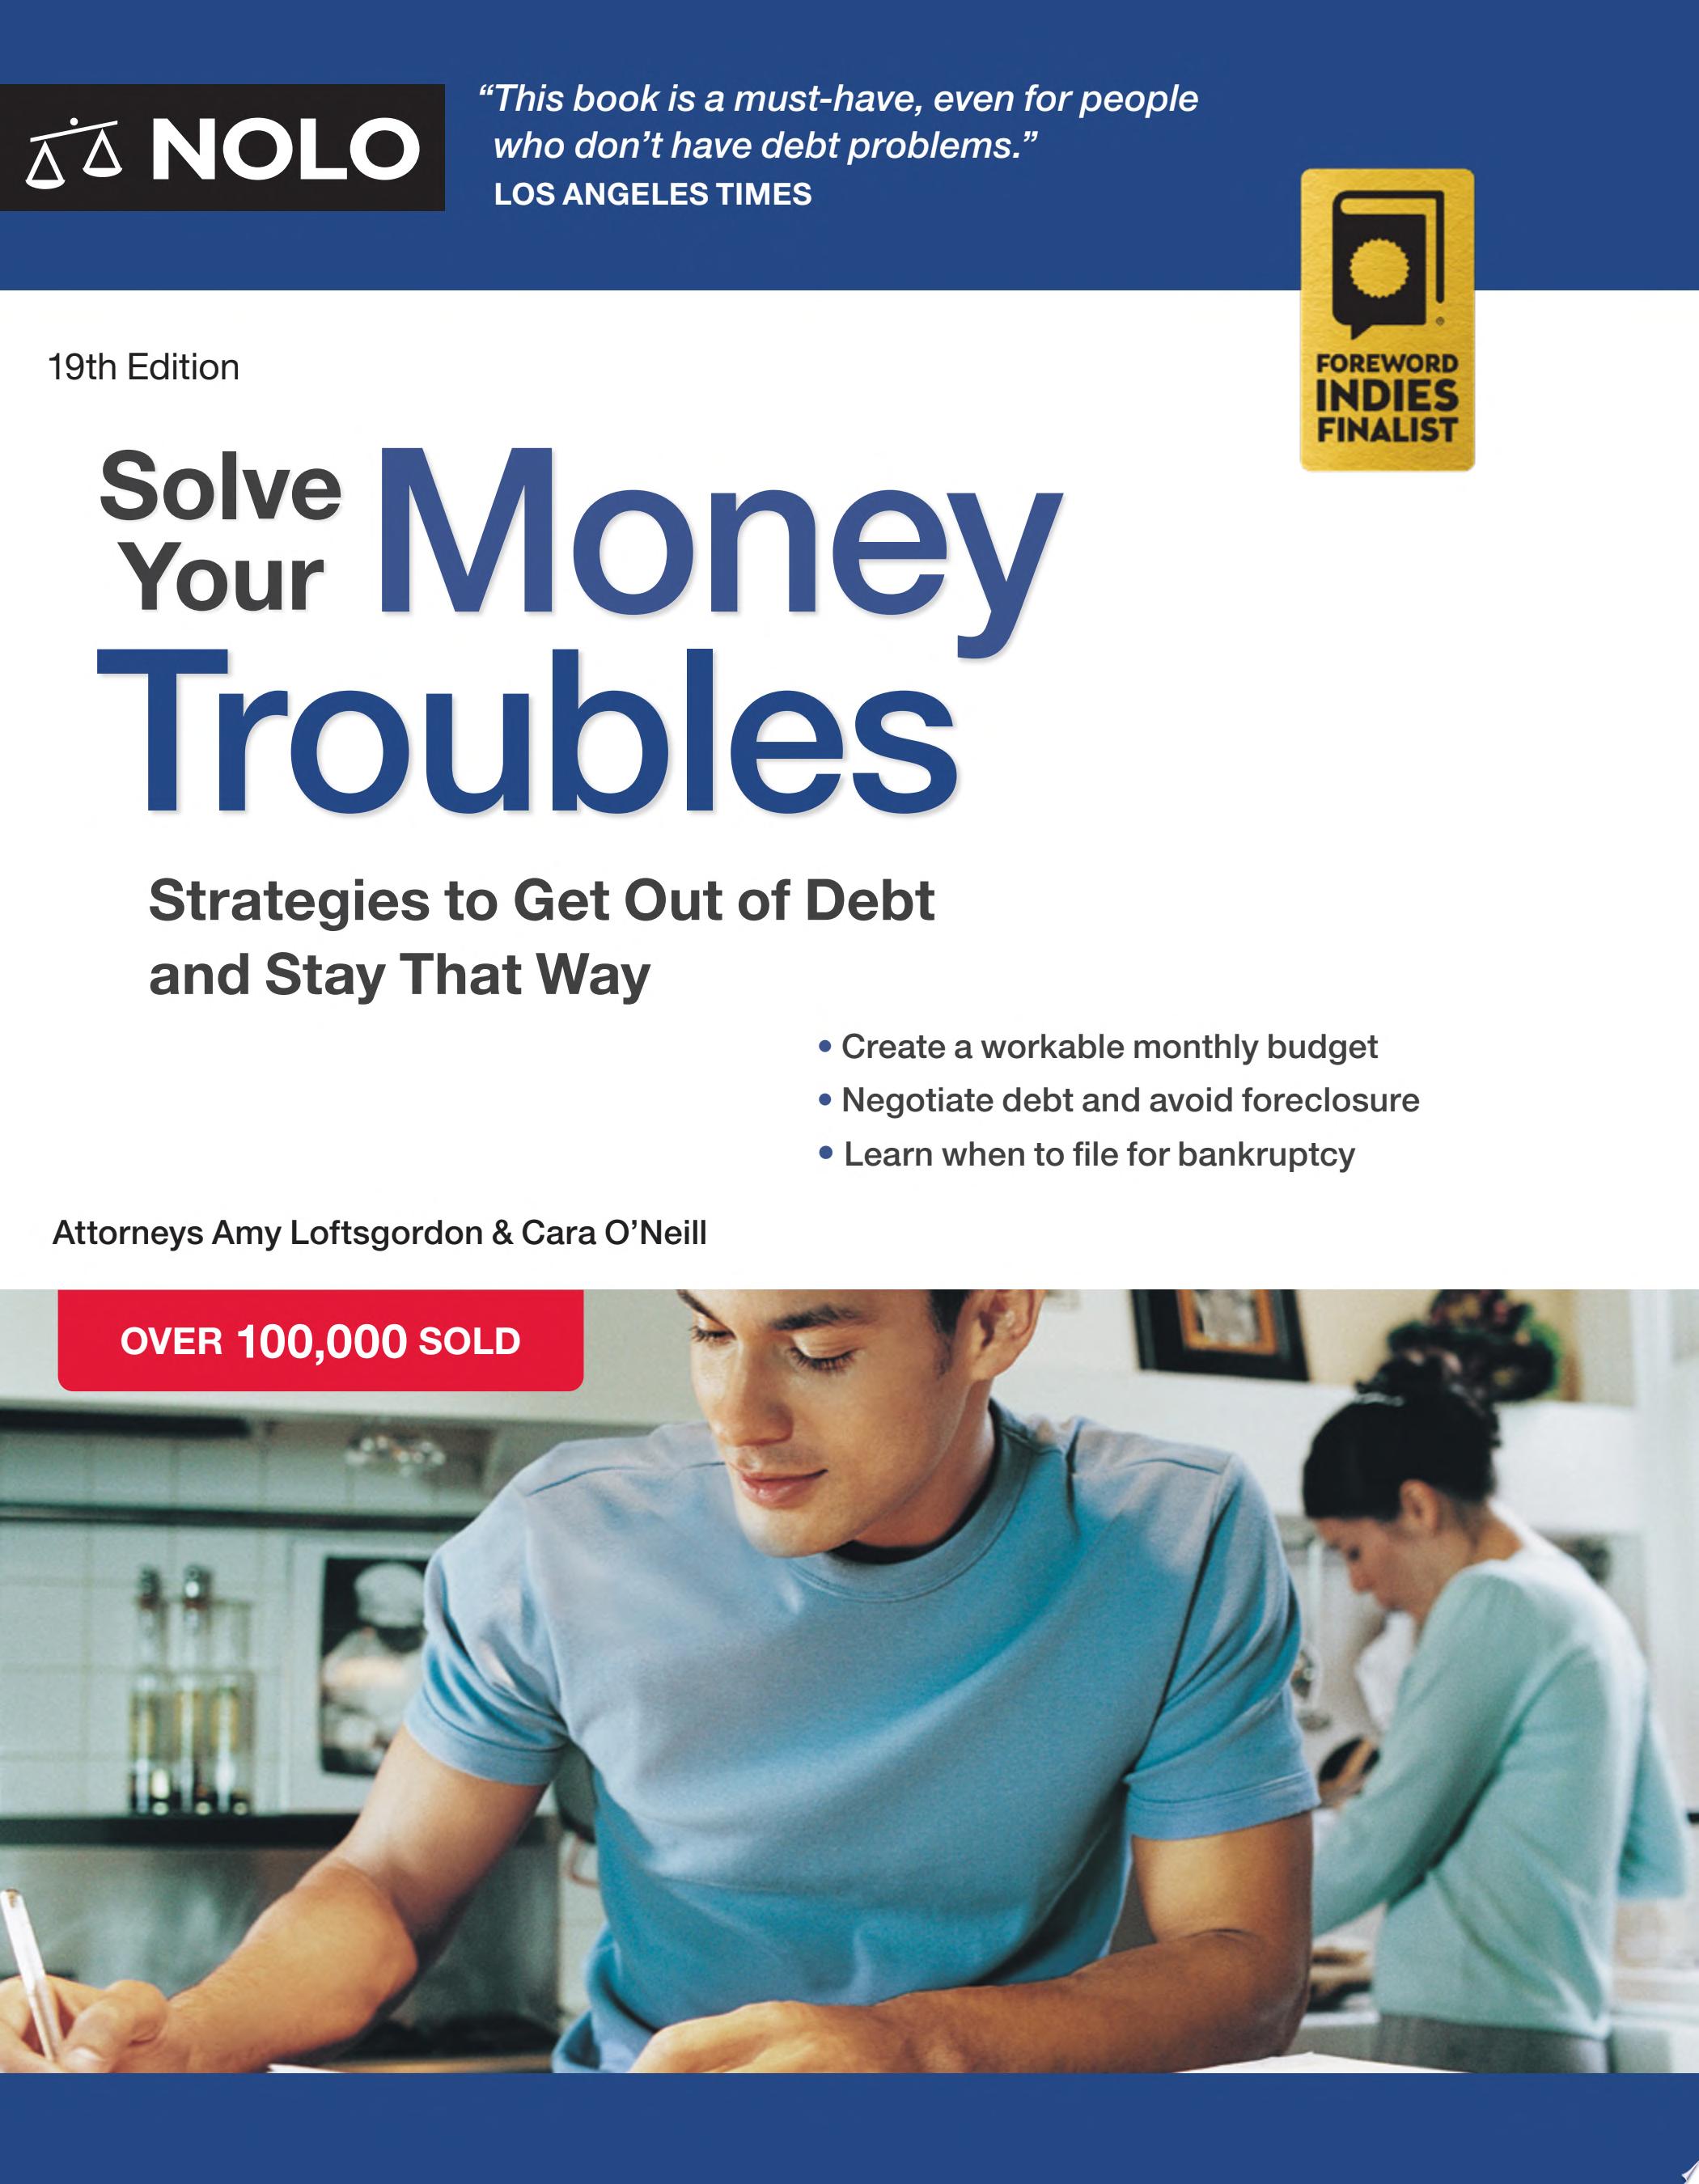 Image for "Solve Your Money Troubles"